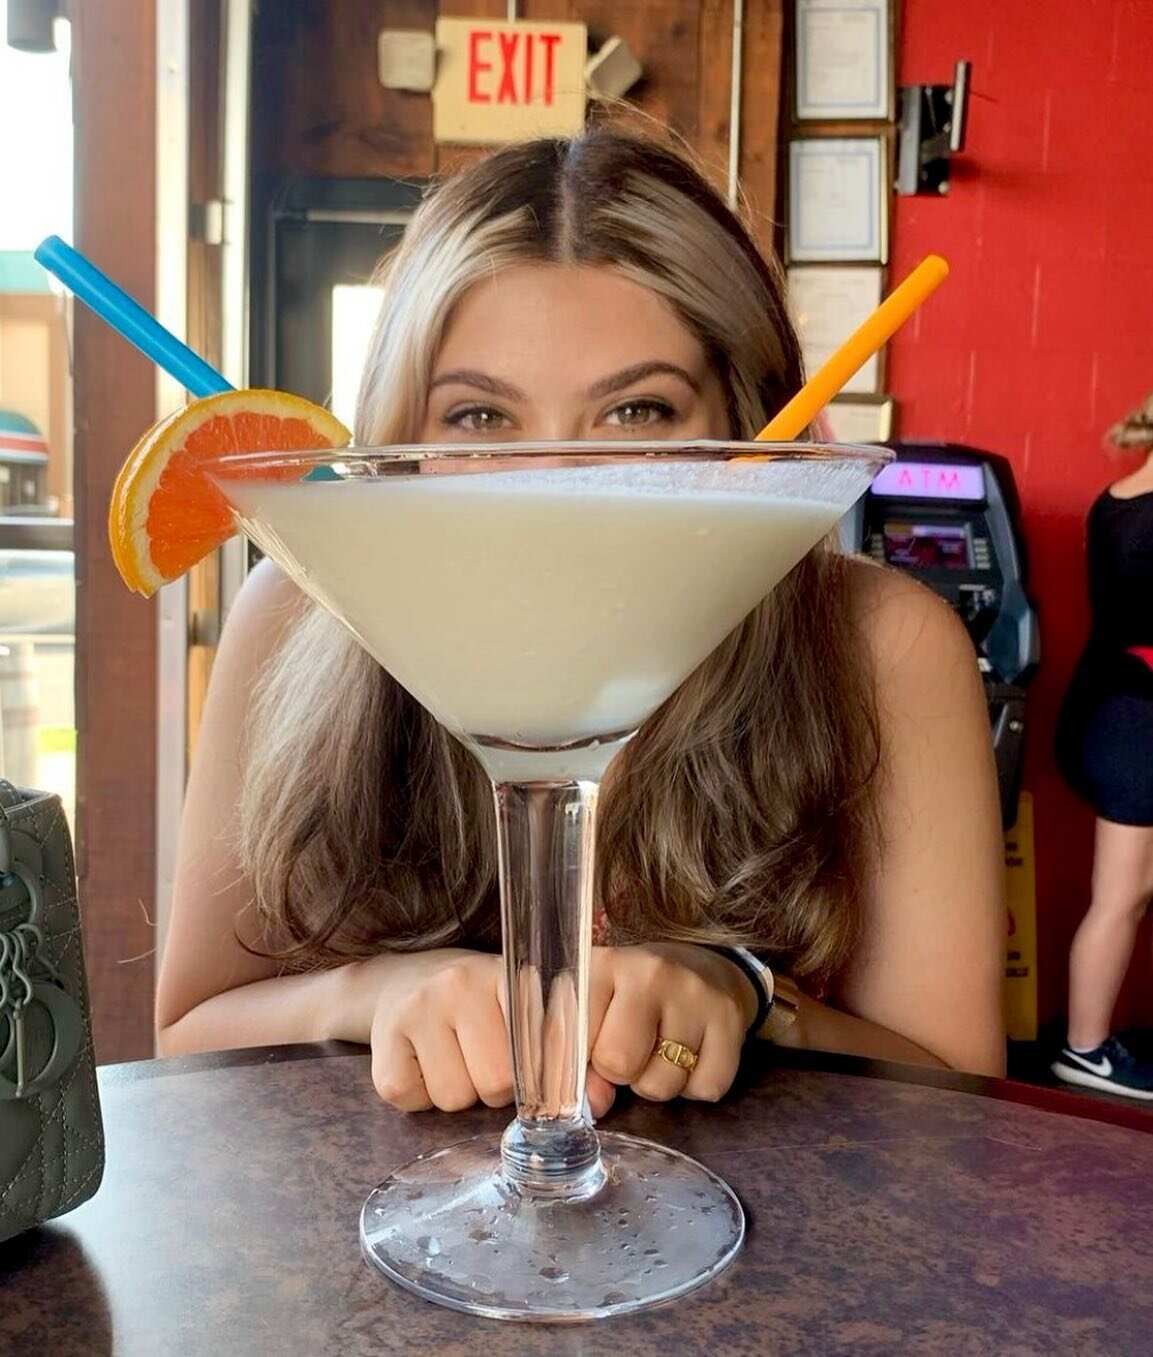 Me: I&rsquo;ll just be having one drink! 
The drink: 😈
.
We&rsquo;ve got drinks as big as your head🤩
PC: @victoriapalermobeauty 
.
#homeofthe45ozmargarita #niagaratourism #instabeauty #niagaraeats #niagarapatios #mexicanfood #fundrinks #instagood #